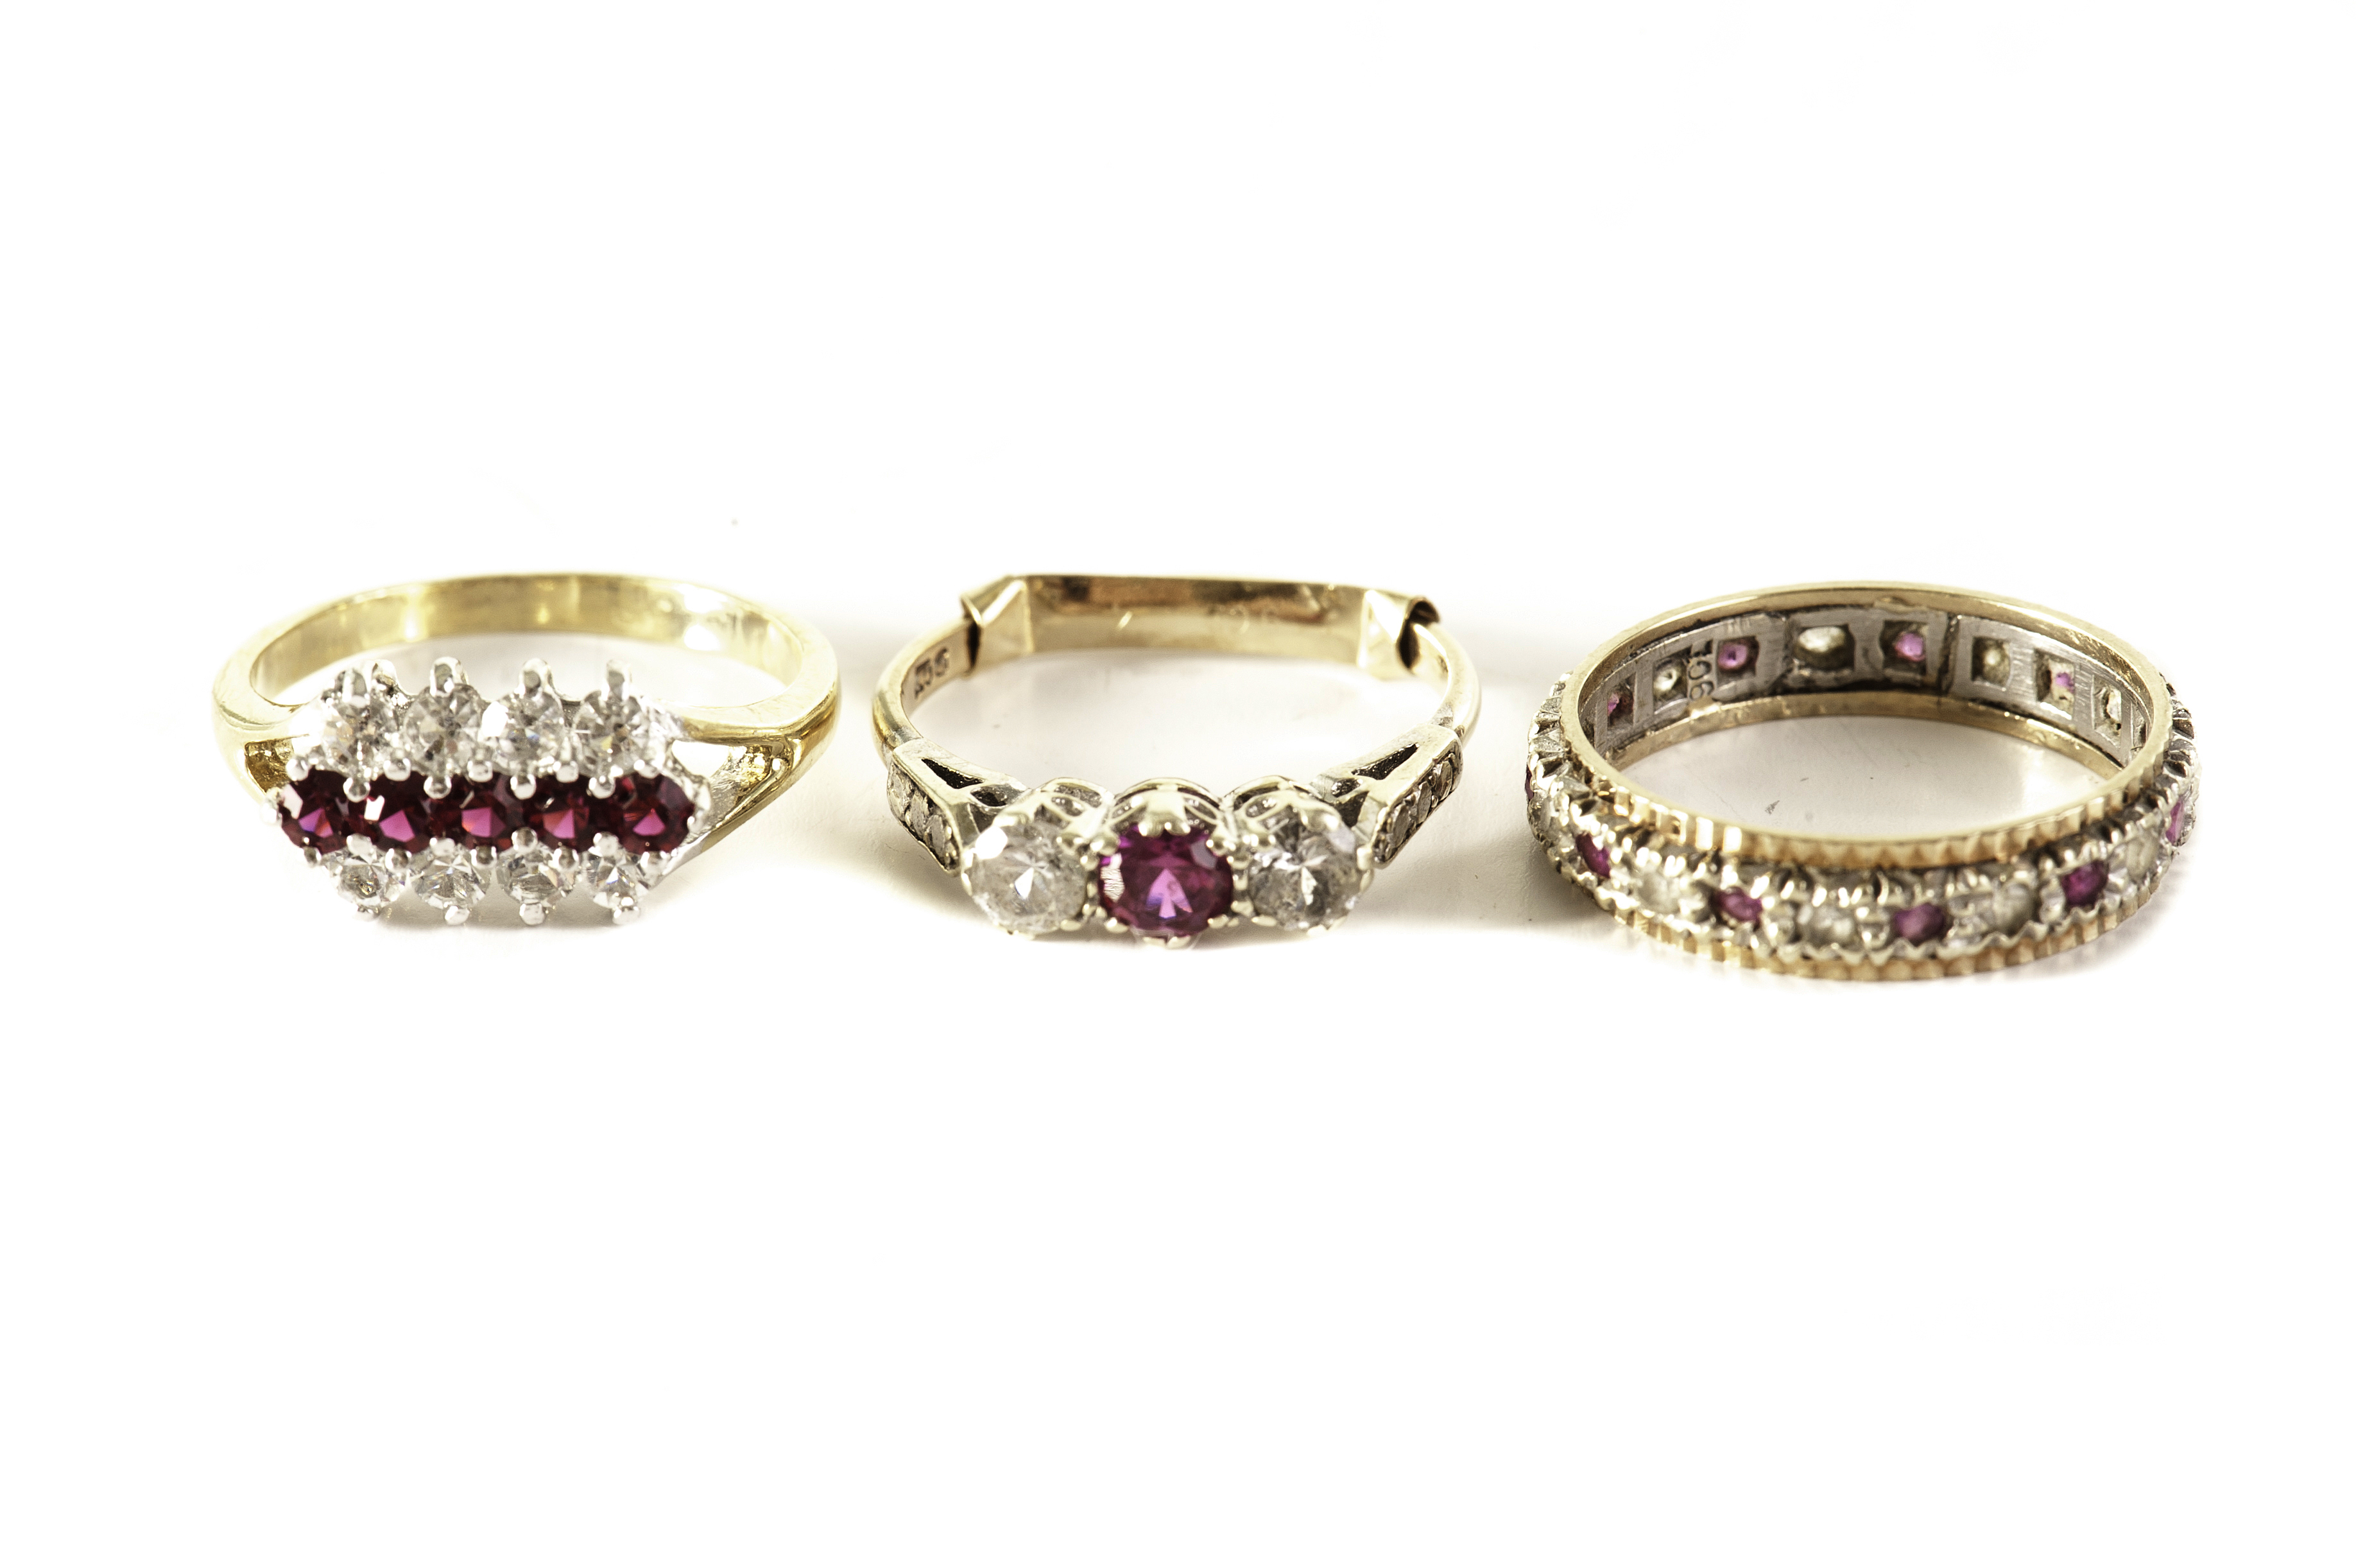 A group of three gem set dress rings, comprising an eternity ring, a three row cluster ring, and